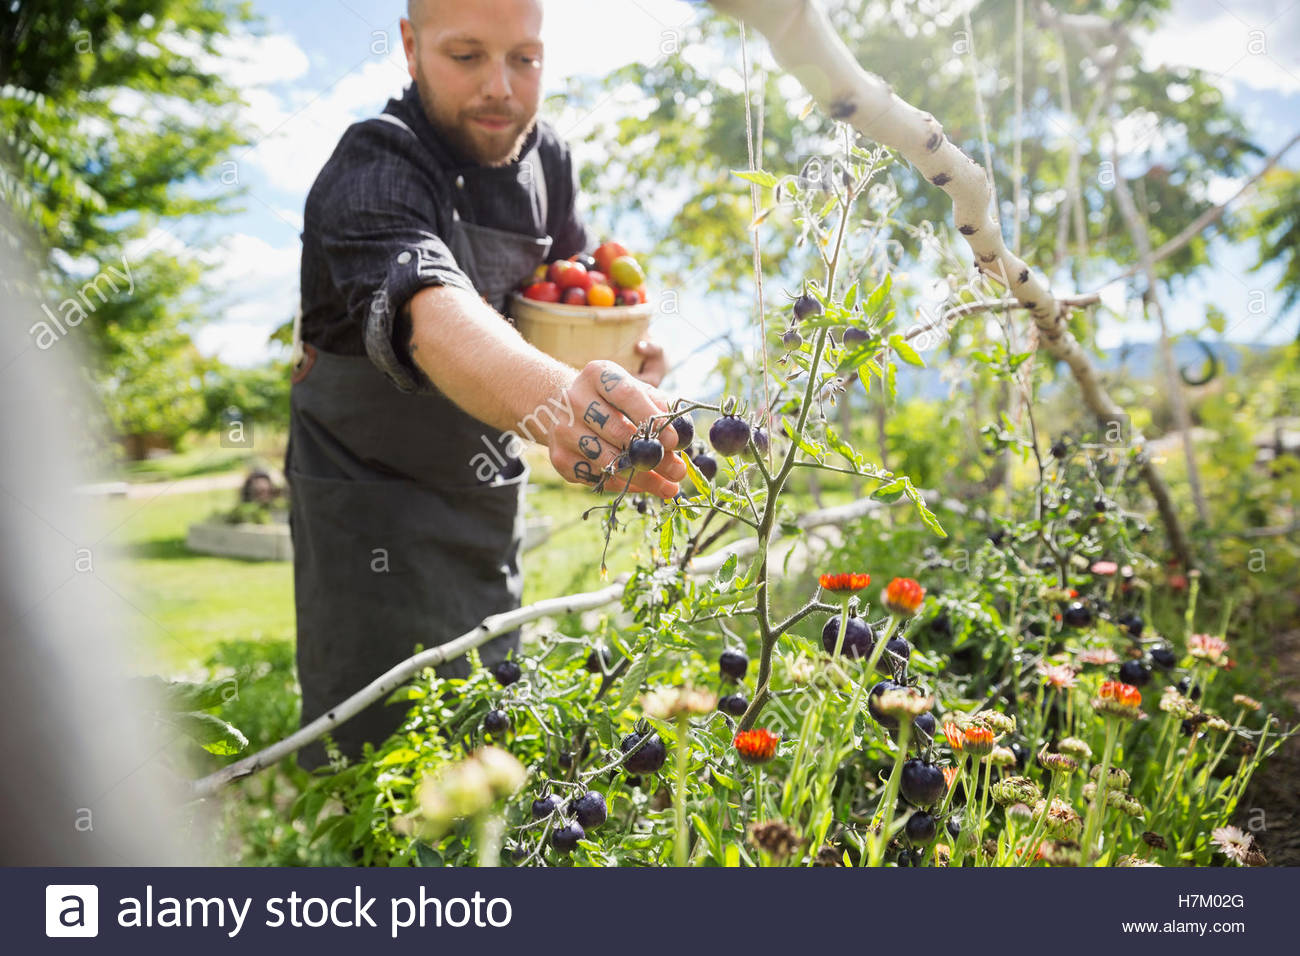 Farm-to-table chef harvesting ripe tomatoes in sunny vegetable garden Stock Photo